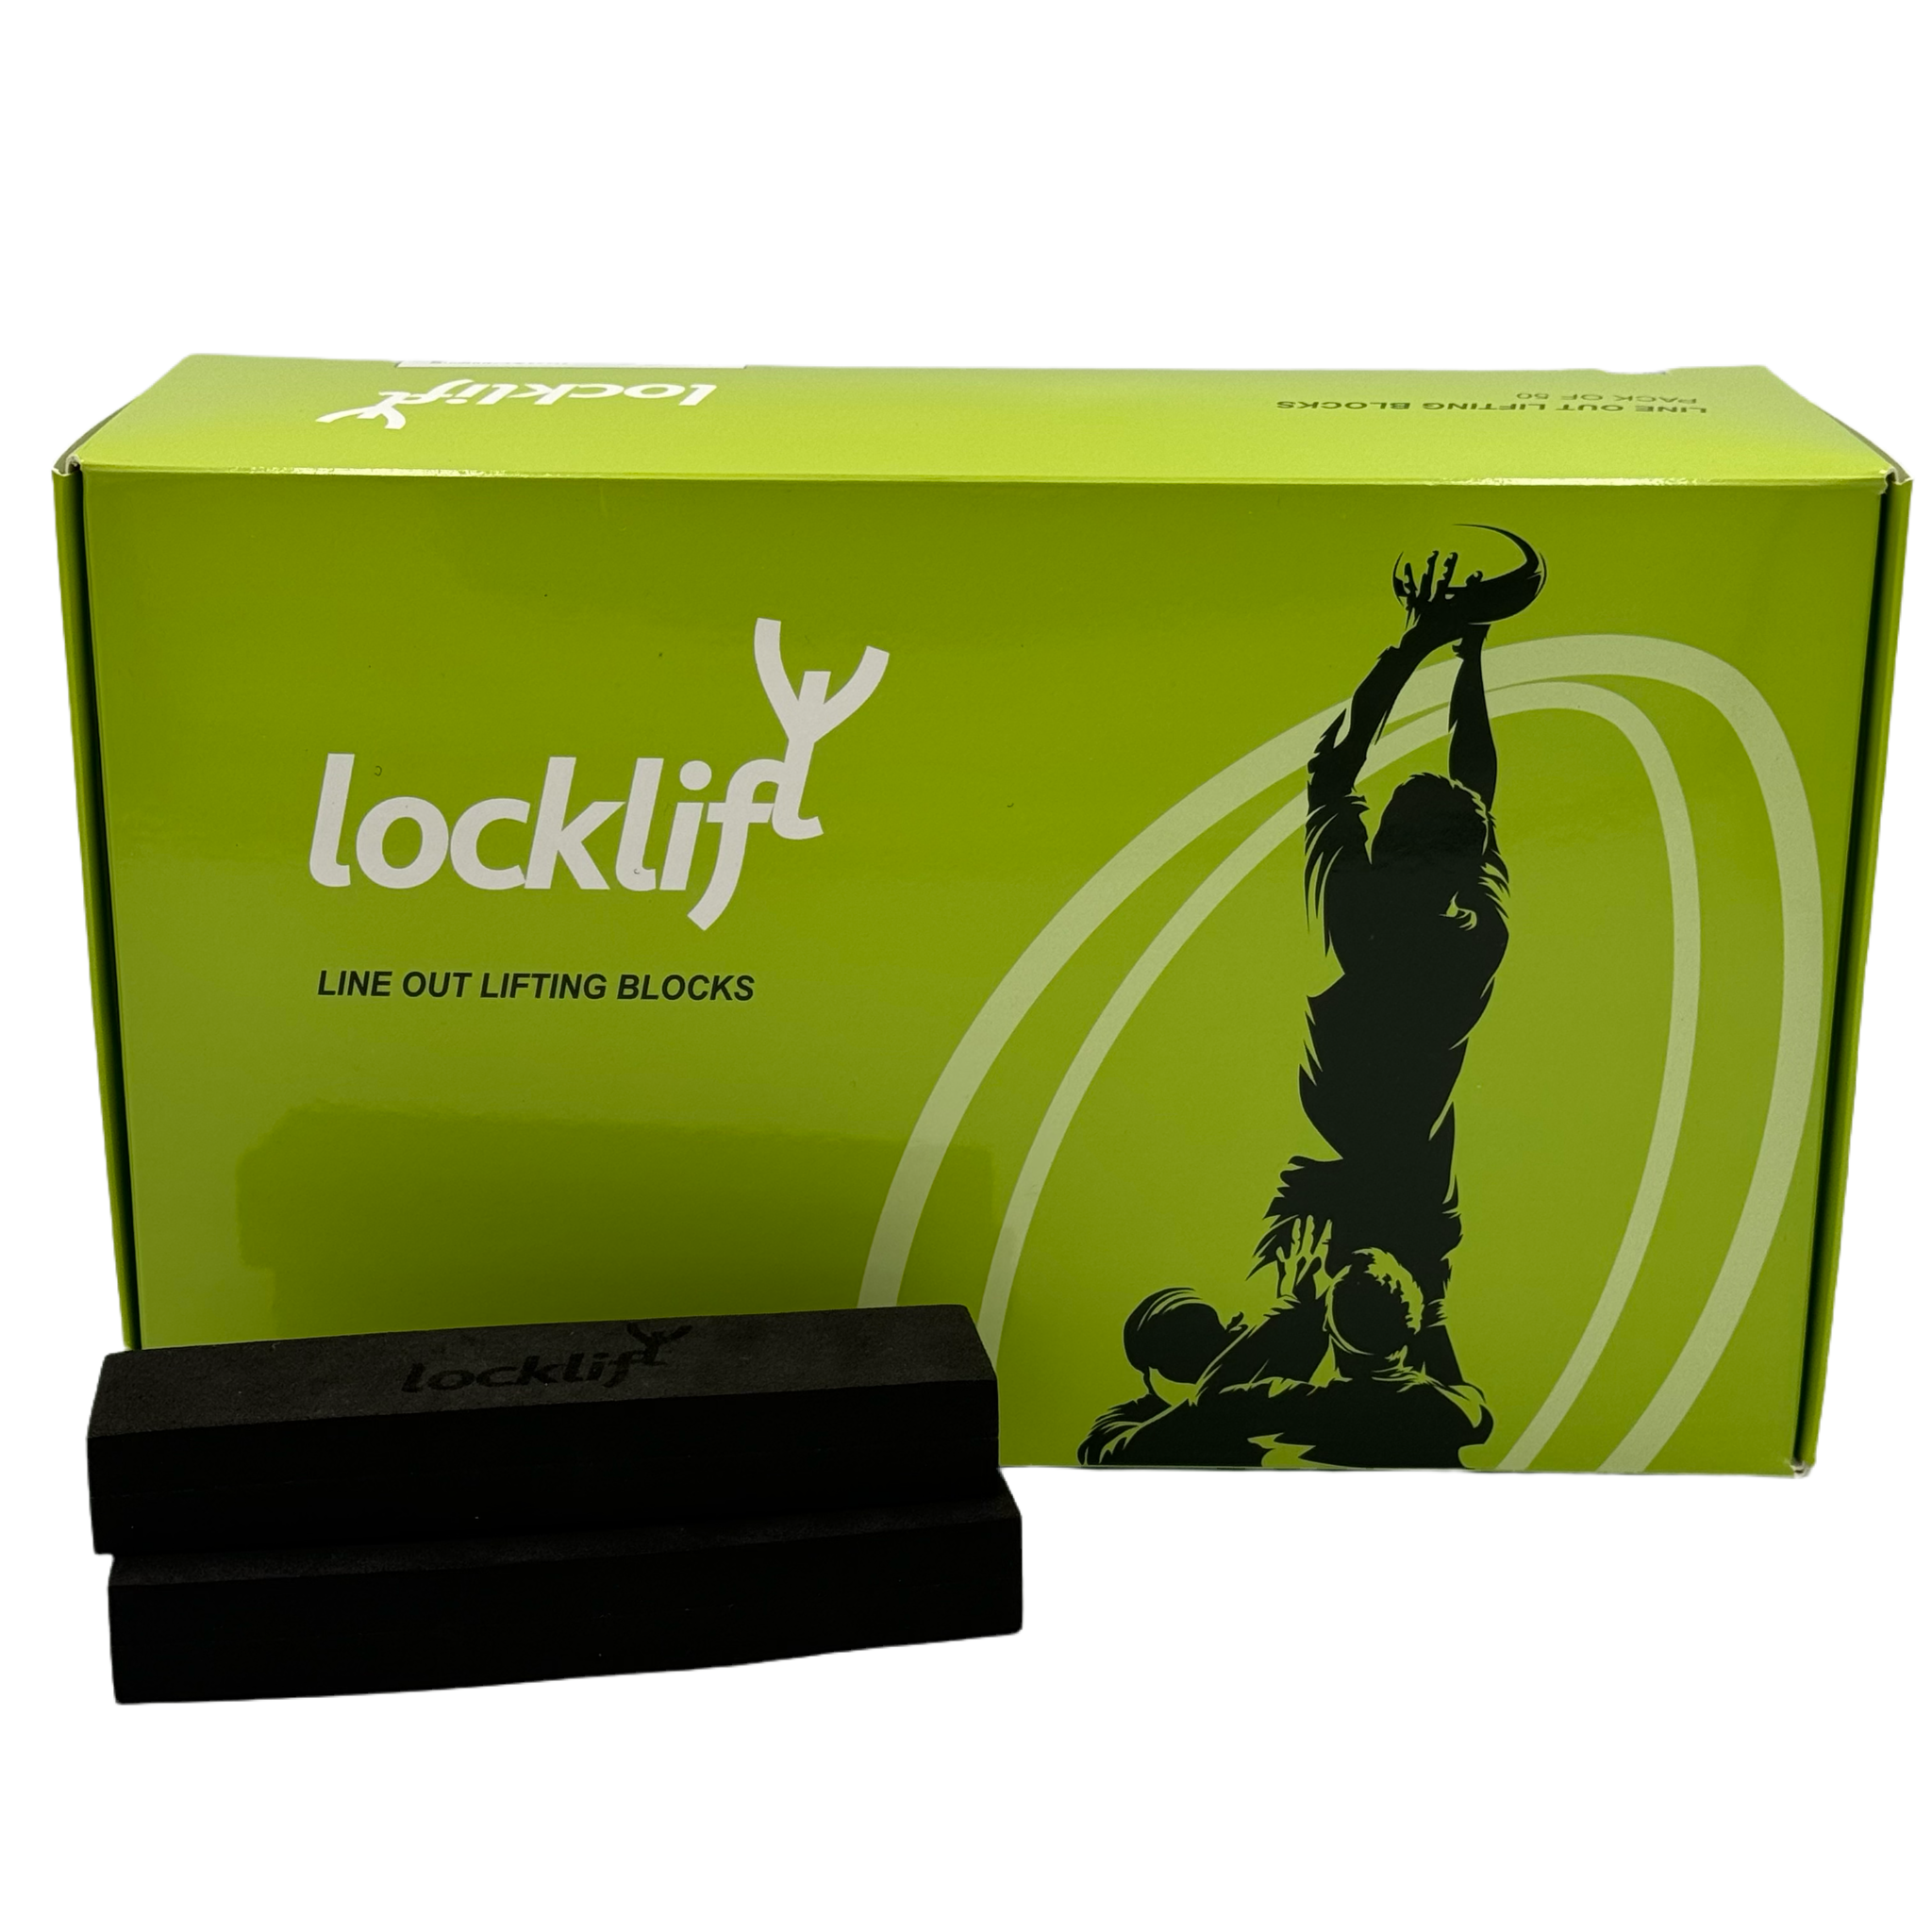 locklift rugby lineout lifting blocks